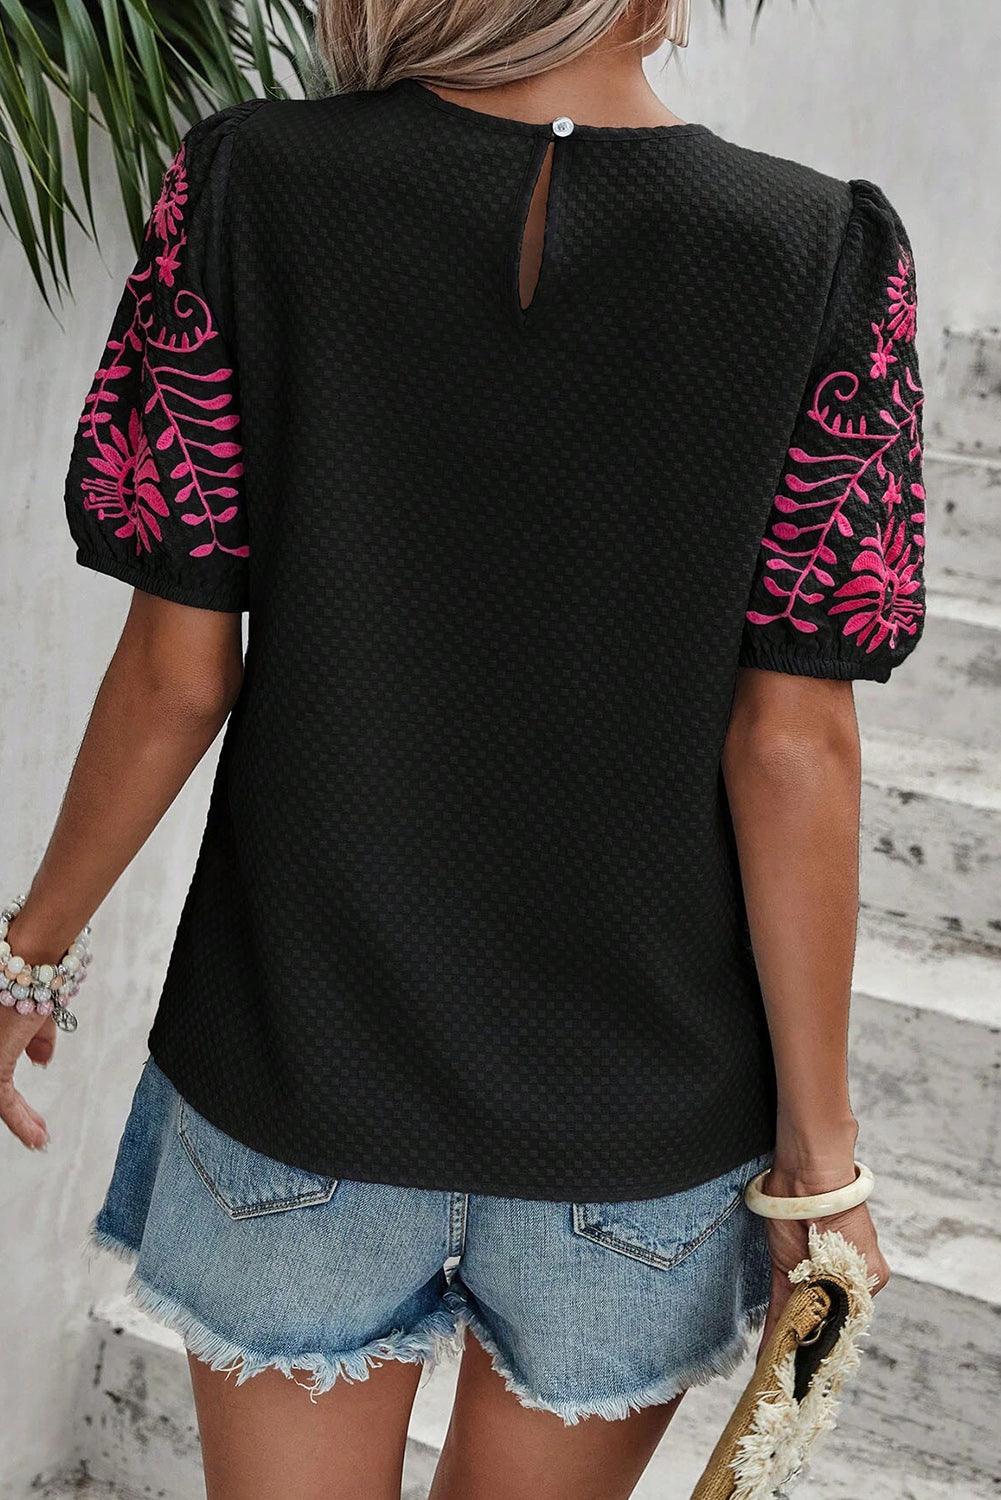 Black Floral Embroidered Textured Puff Sleeve T Shirt - L & M Kee, LLC